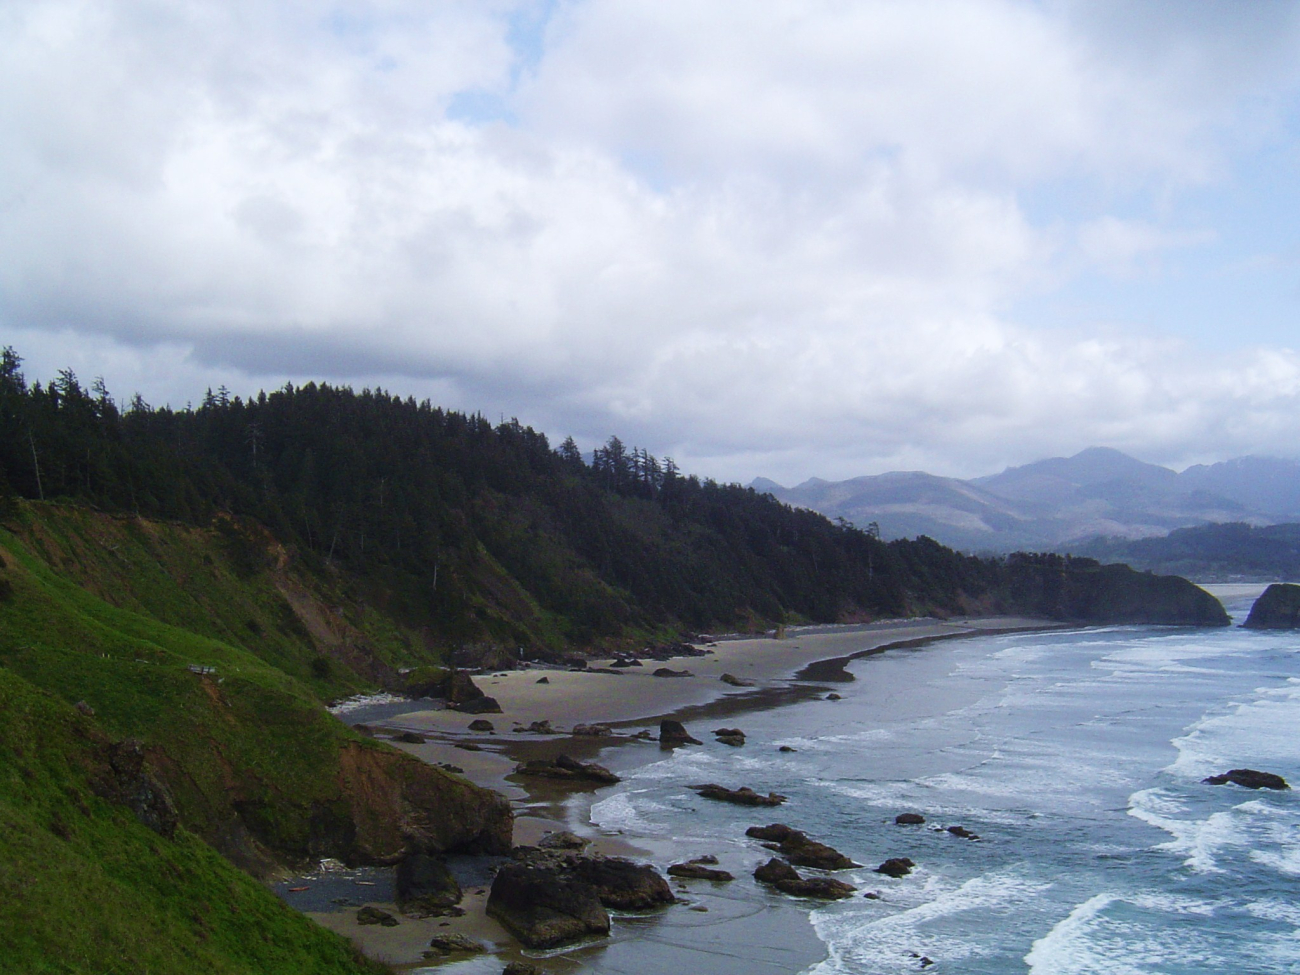 Looking south from the Tillamook Head area